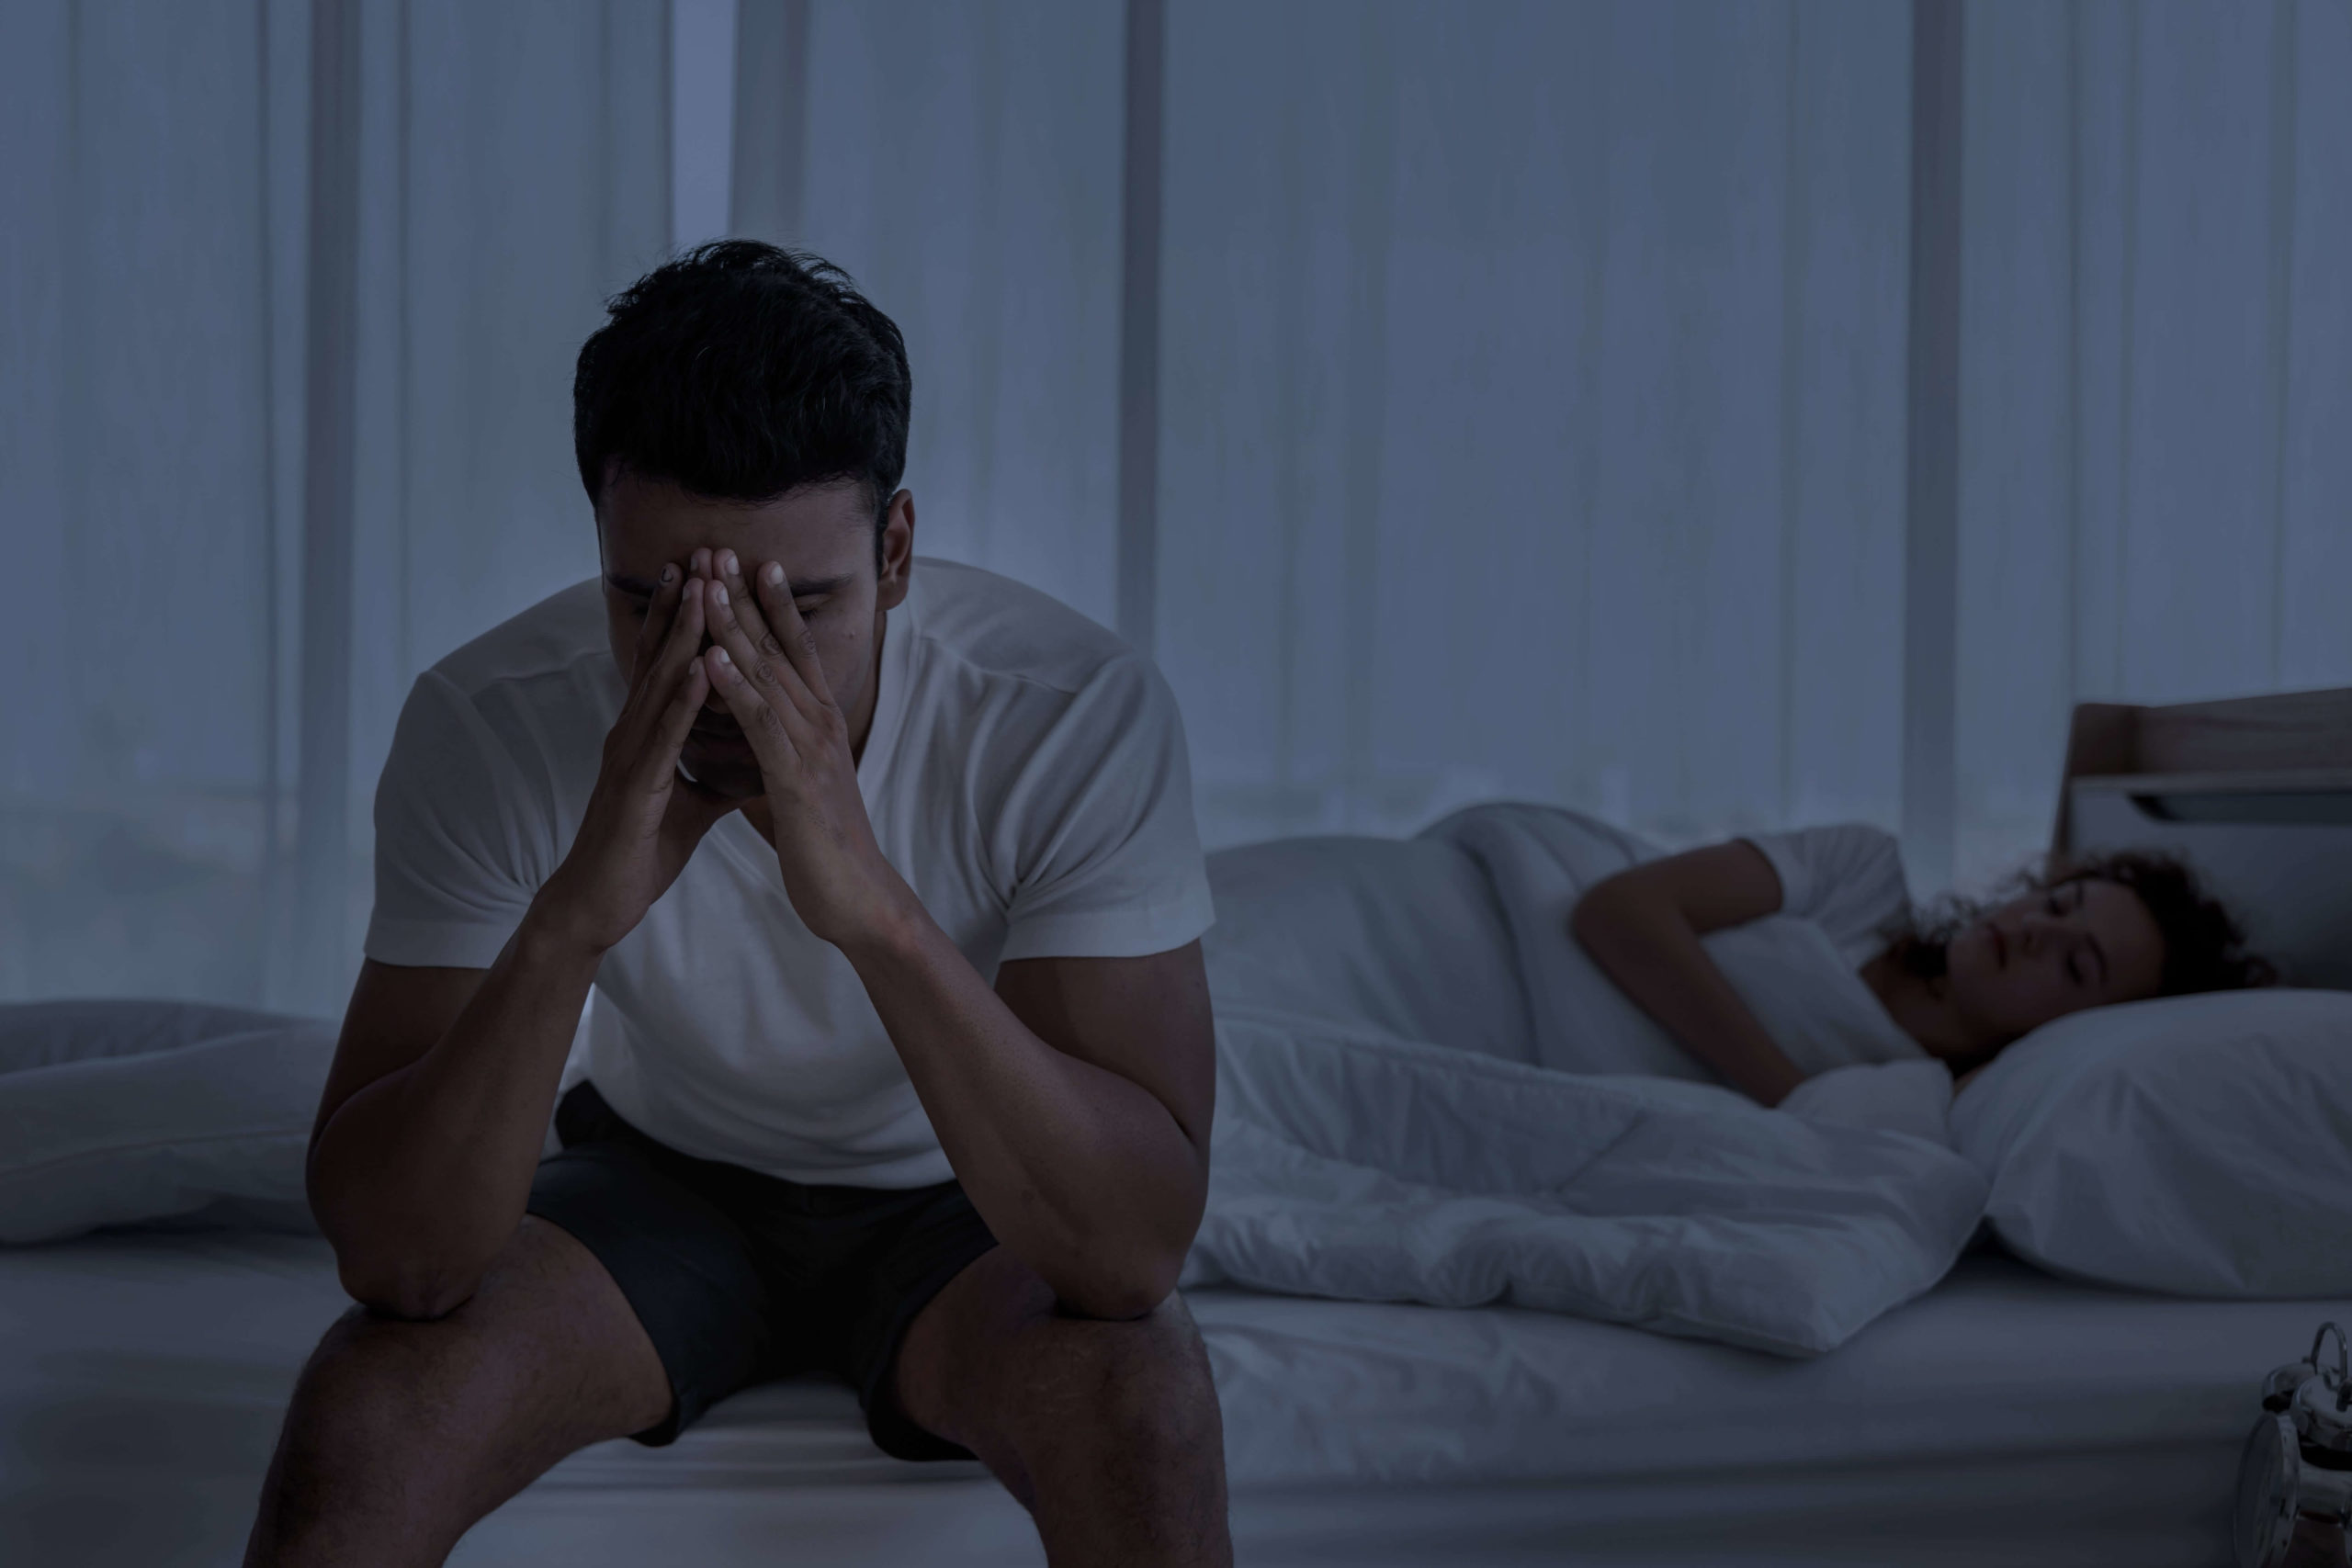 Looking into the link between insomnia and mental health